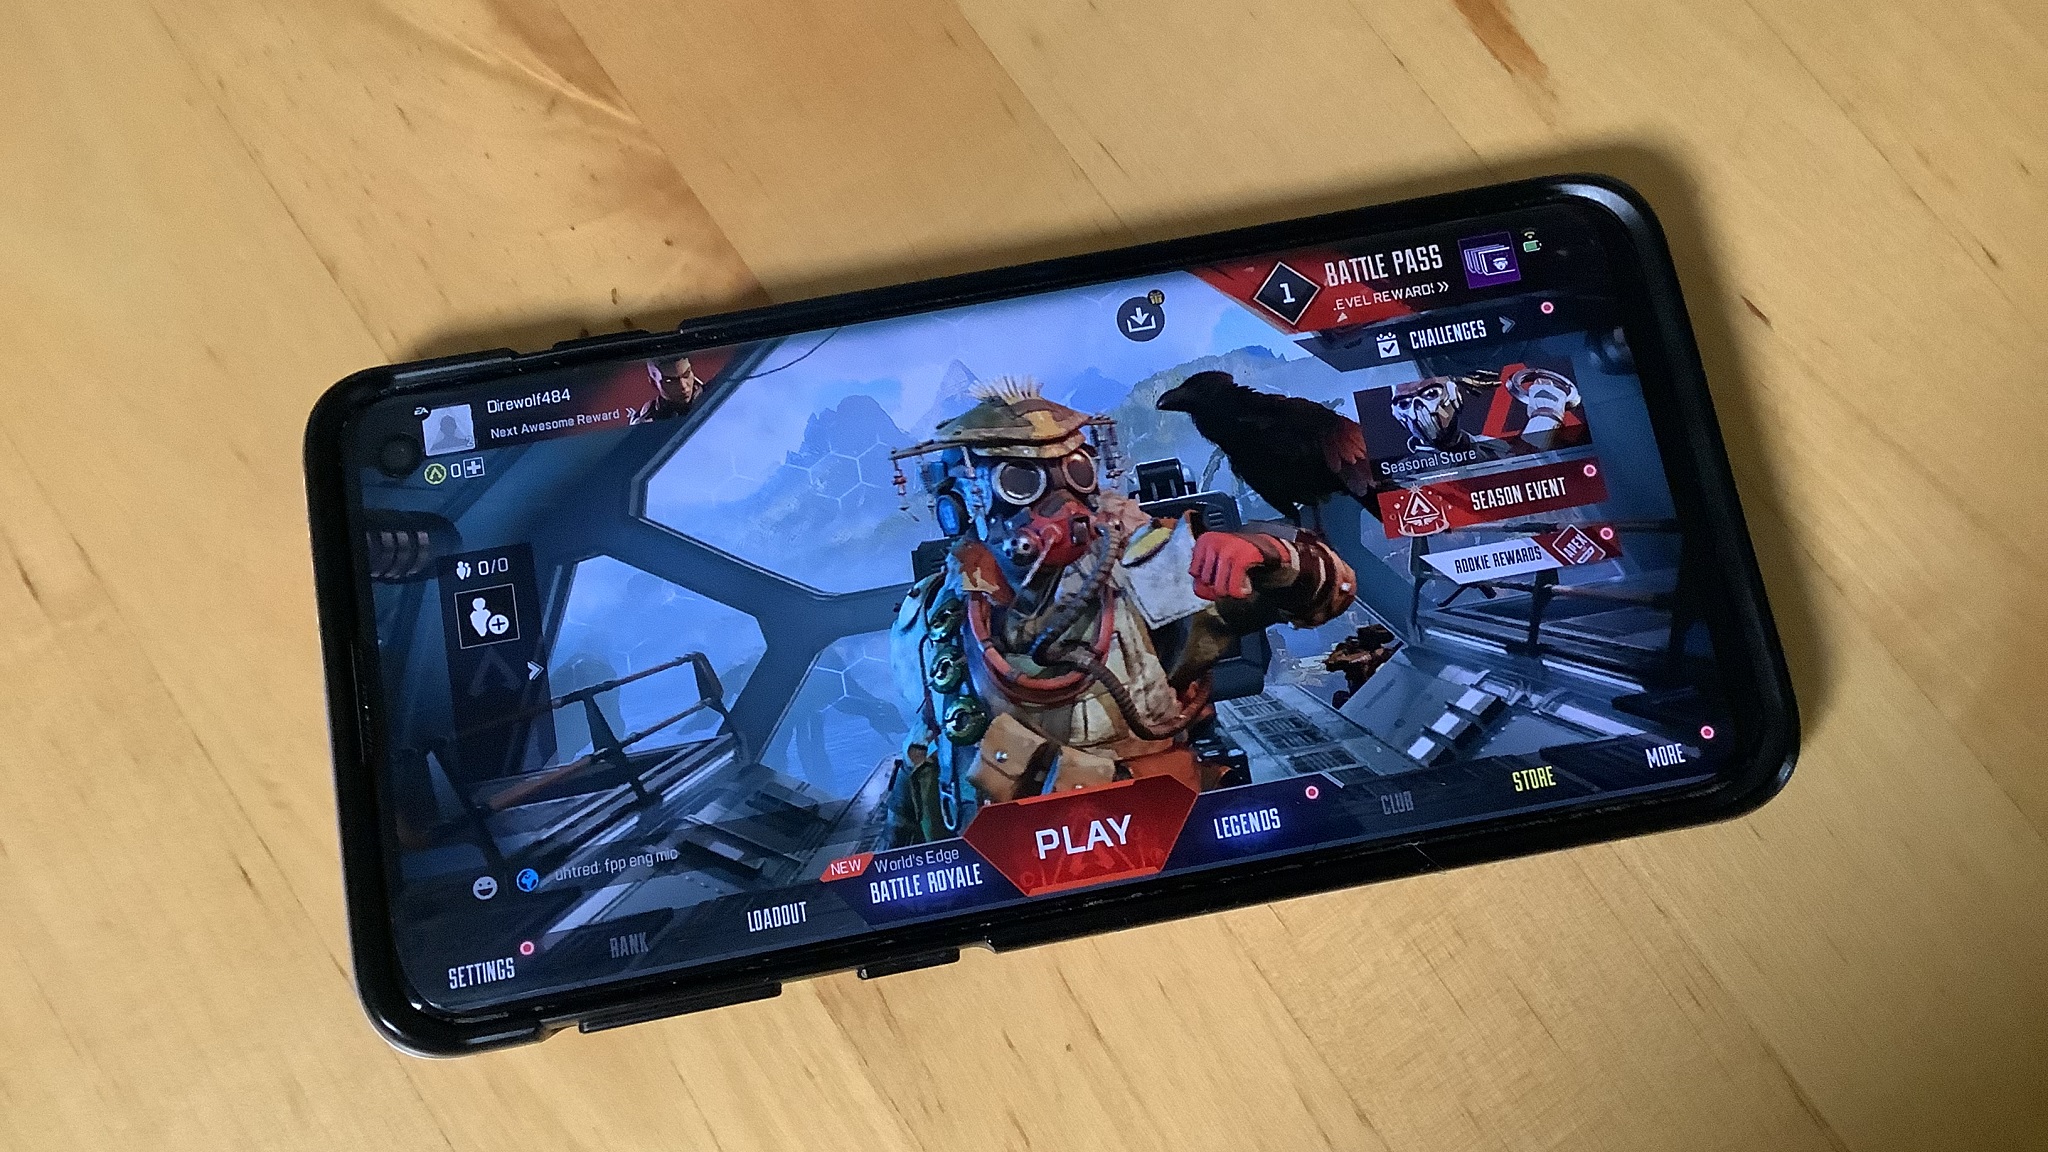 10 best battle royale games for Android and iOS - PhoneArena